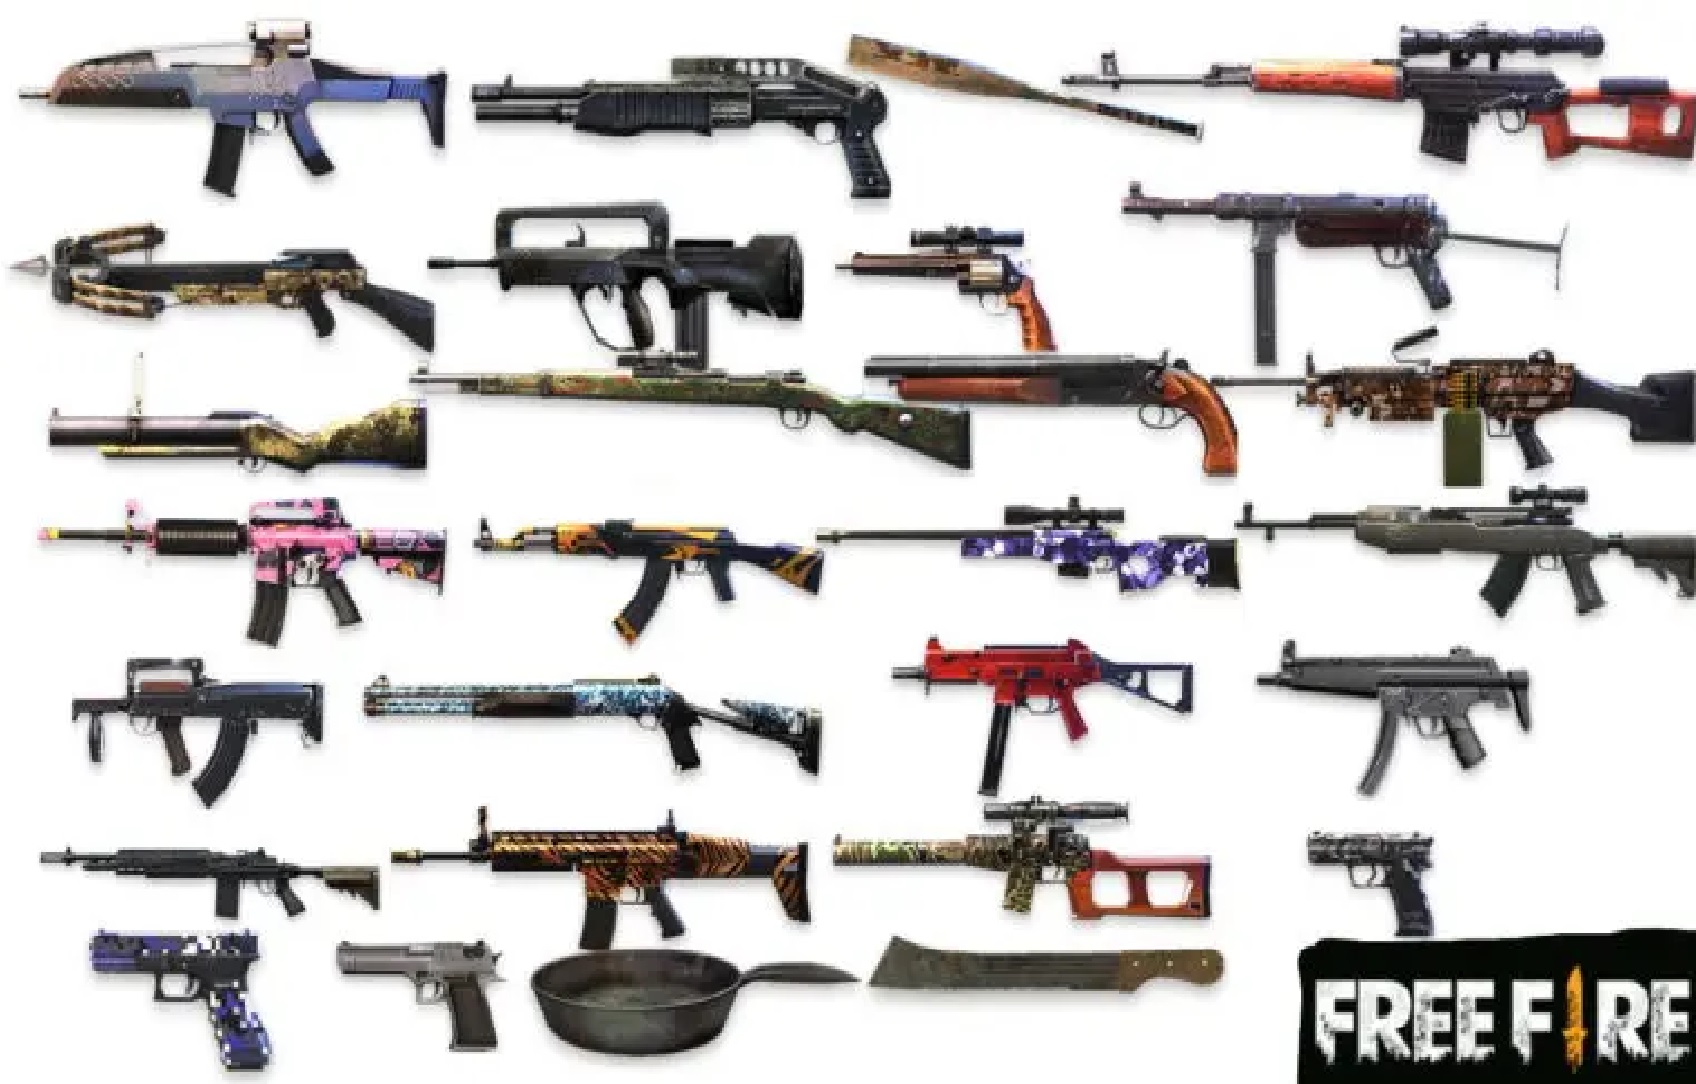 Top 4 Indonesian Free Fire Player s Favorite Weapons 